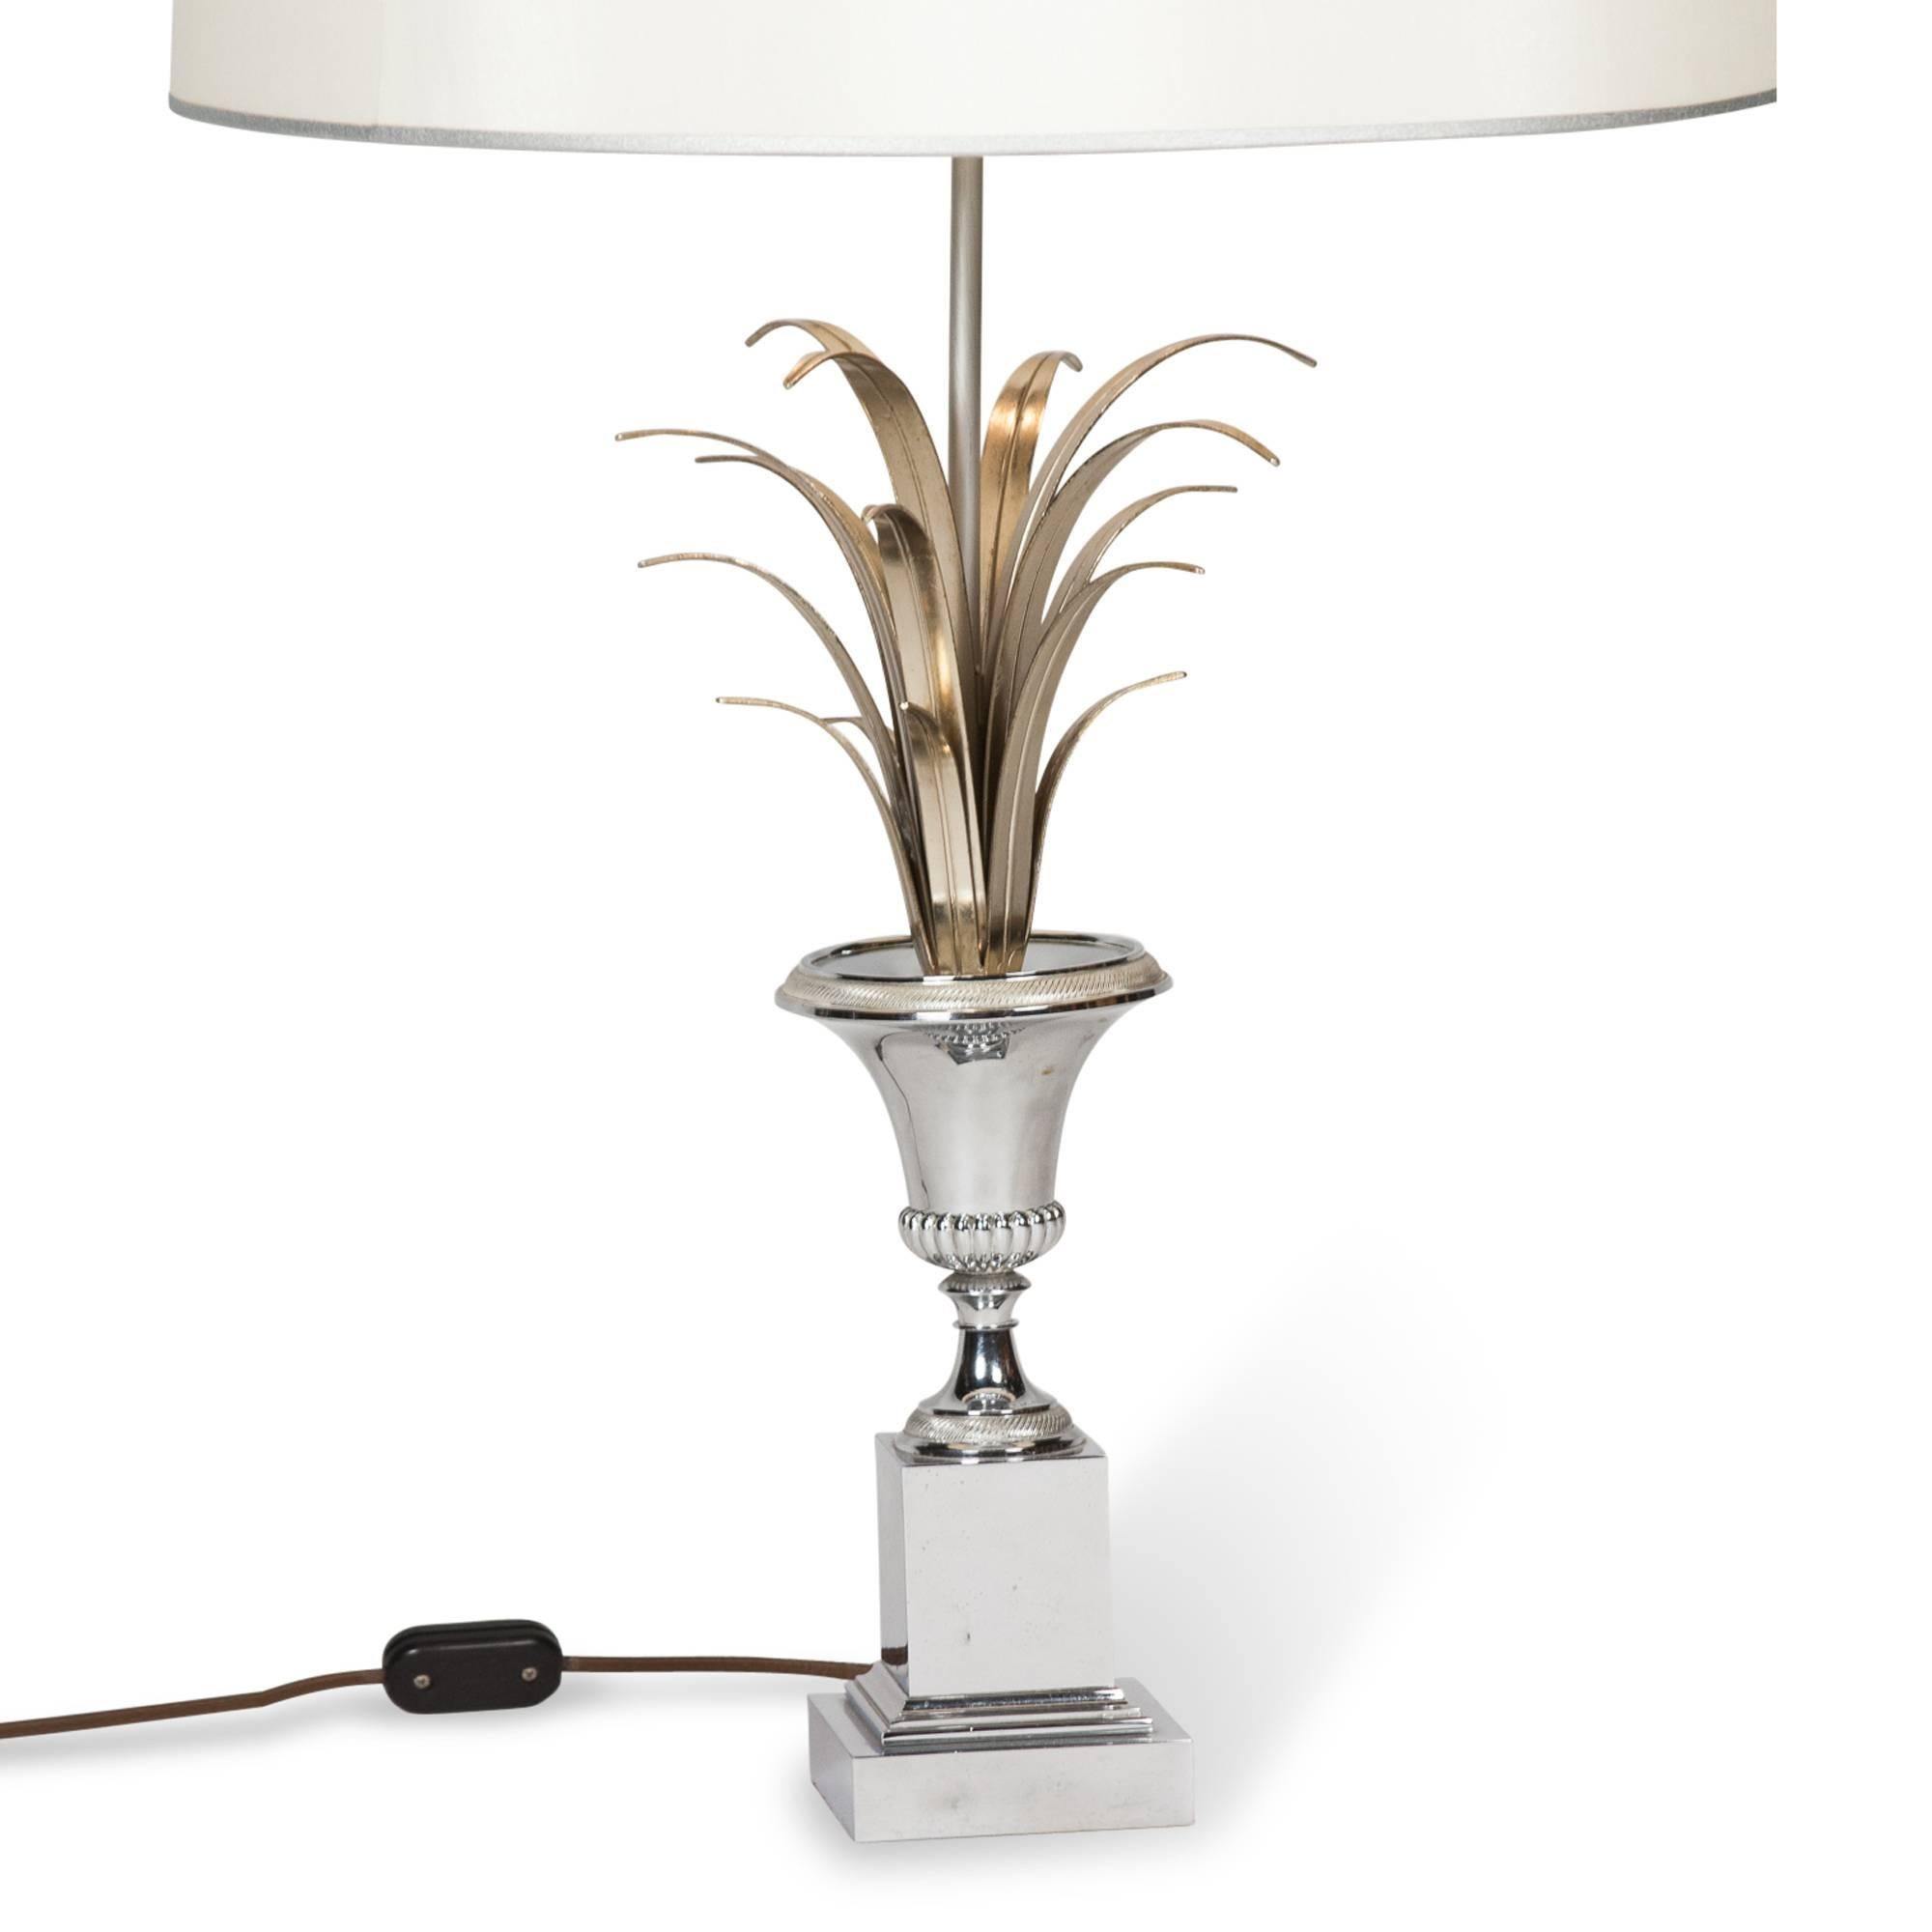 Mid-20th Century Polished Nickel Table Lamp by Charles et Cie, French, 1960s For Sale